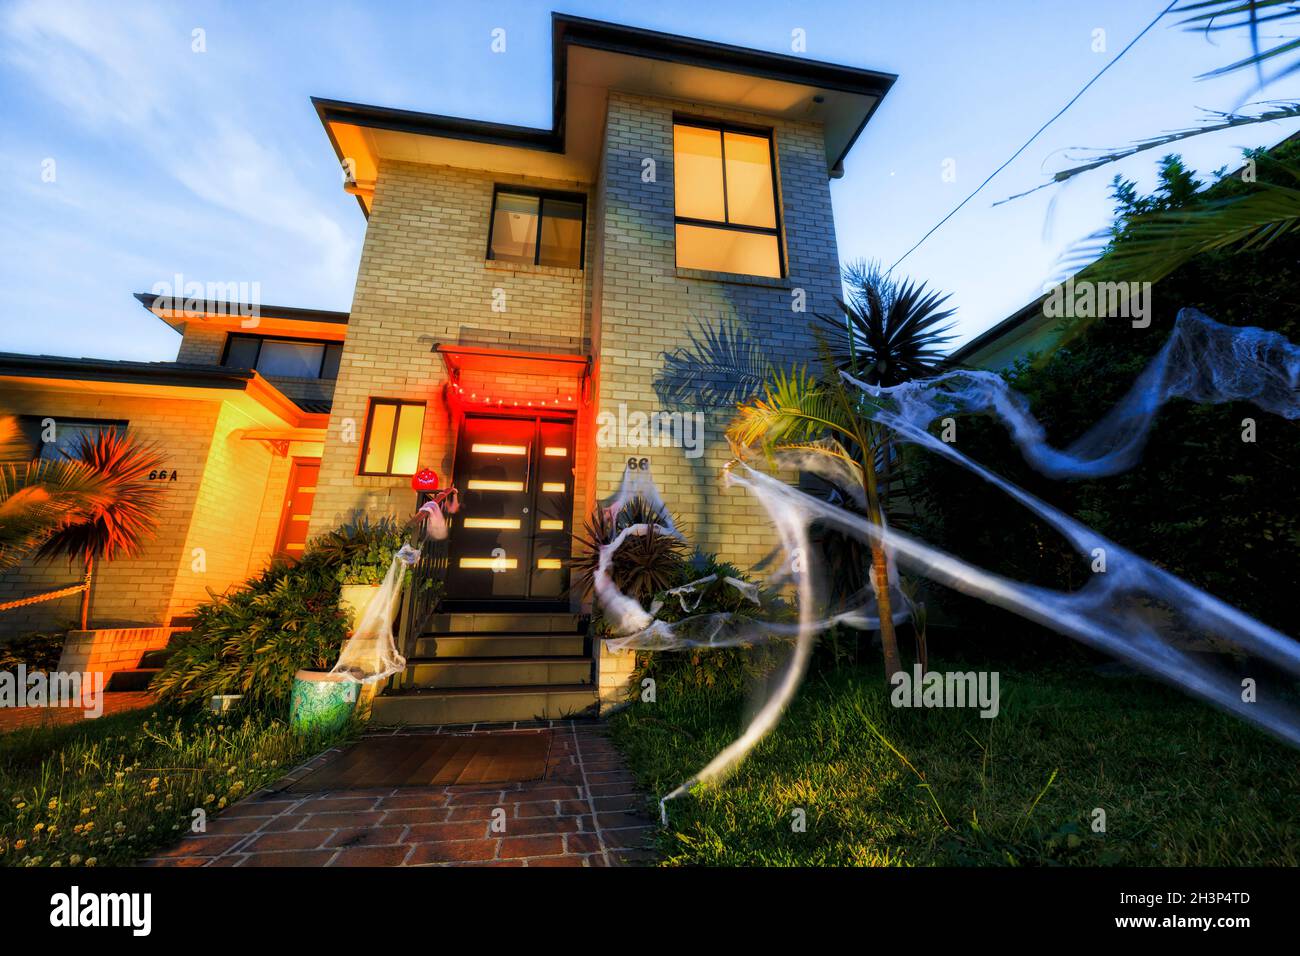 Facade of Halloween decorated house in Australia - green front yard and spider webs everywhere with lights. Stock Photo